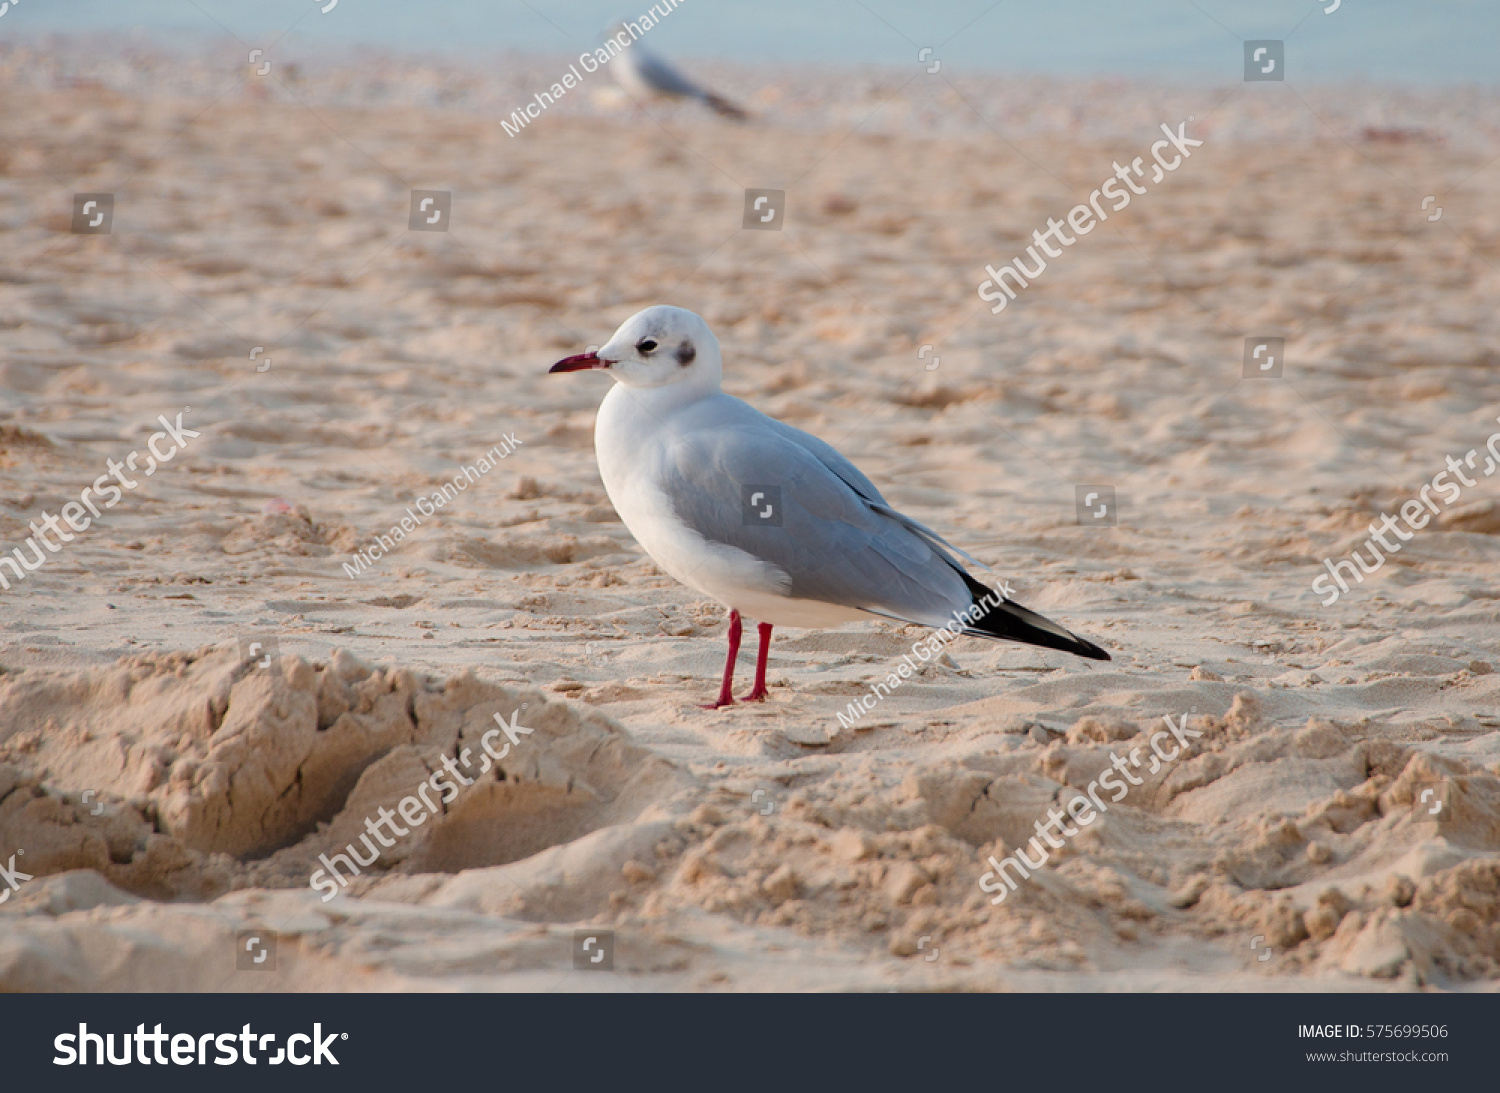 A common seagull (Larus canus) is staying on the sand beach. #575699506